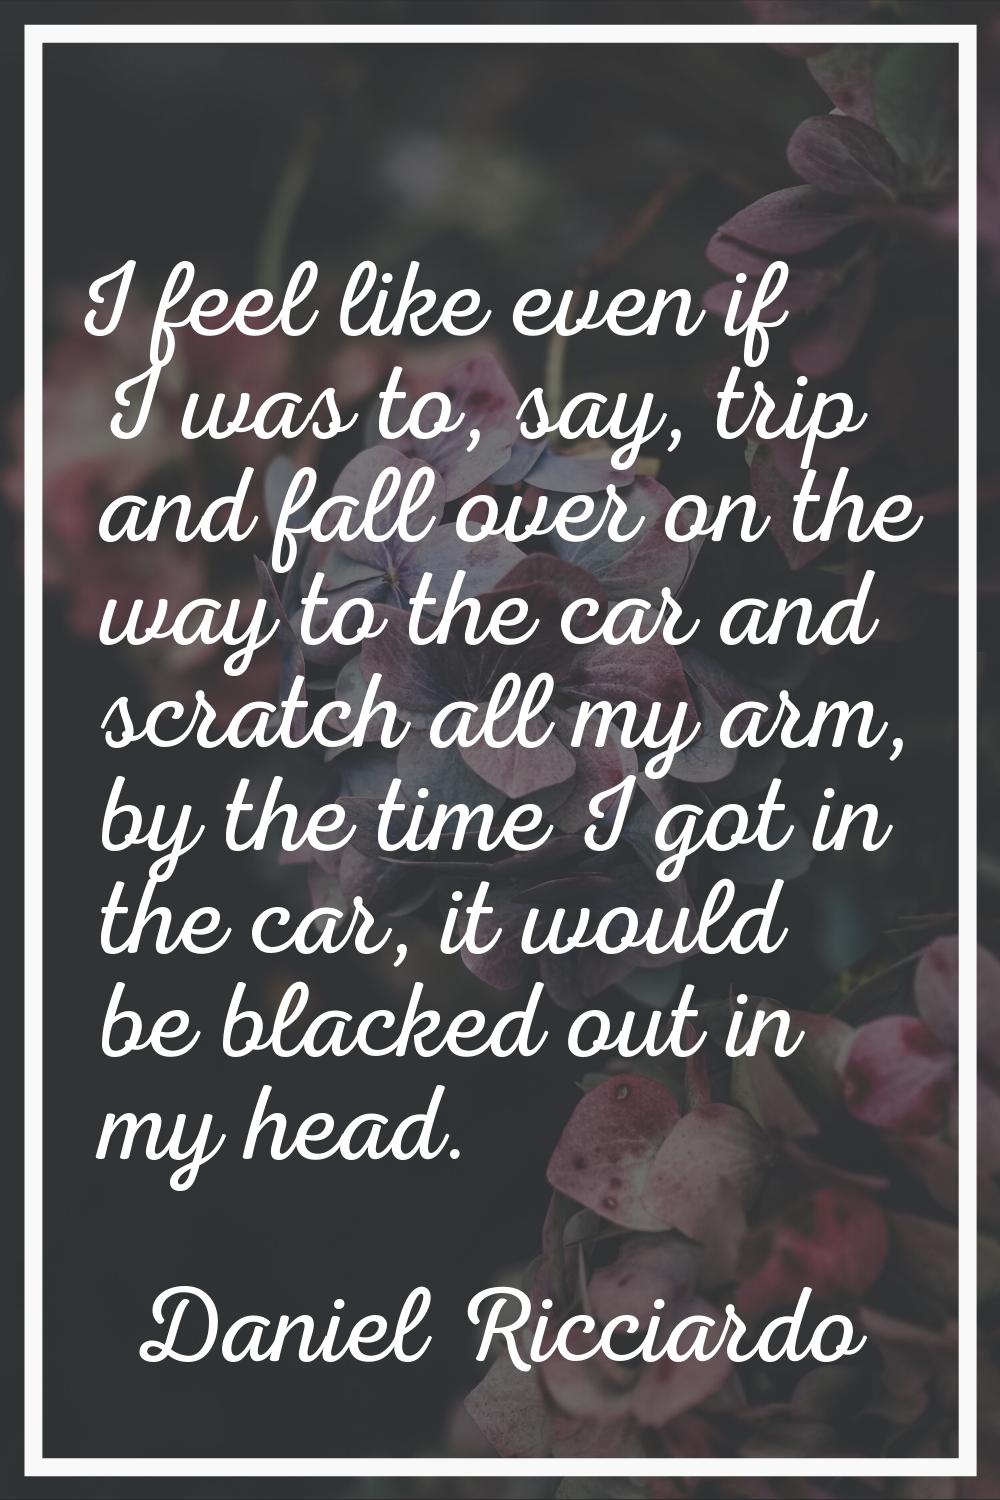 I feel like even if I was to, say, trip and fall over on the way to the car and scratch all my arm,